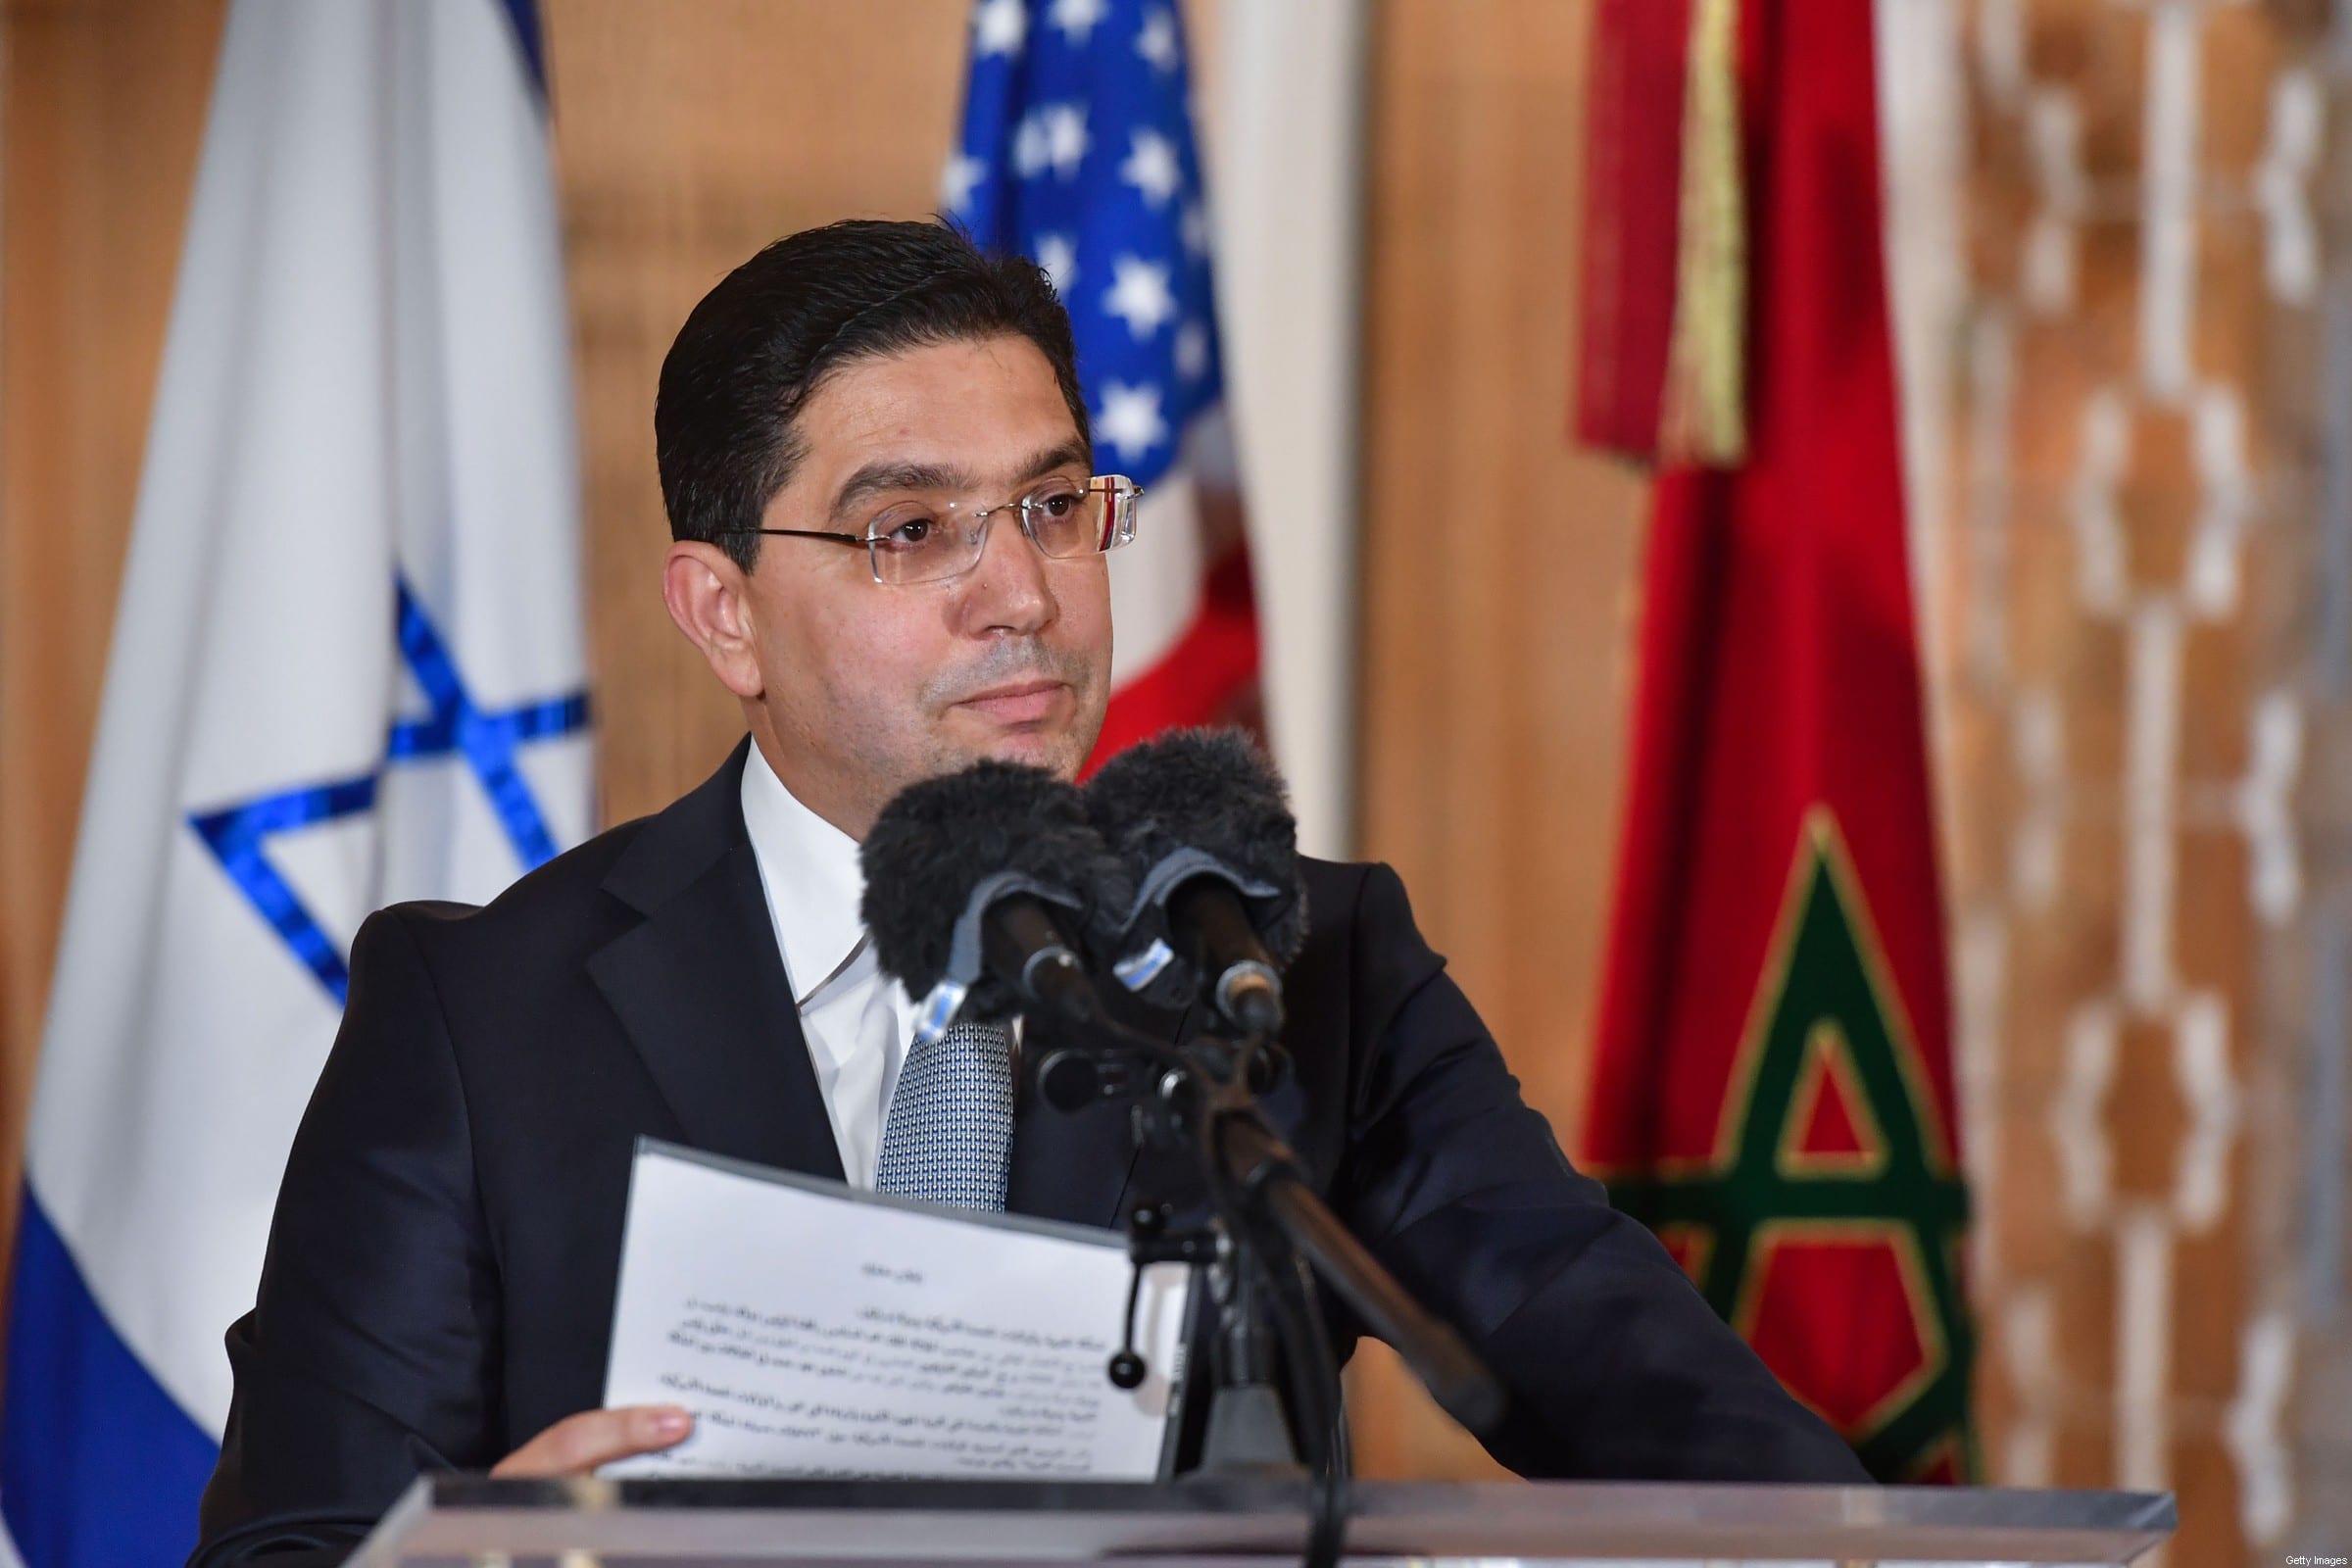 Morocco's Minister of Foreign Affairs Nasser Bourita speaks upon the arrival of the US Presidential advisor and Israeli National Security Advisor at the Royal Palace in the Moroccan capital Rabat on December 22, 2020, on the first Israel-Morocco direct commercial flight, marking the latest US-brokered diplomatic normalisation deal between the Jewish state and an Arab country. (Photo by FADEL SENNA / AFP) (Photo by FADEL SENNA/AFP via Getty Images)